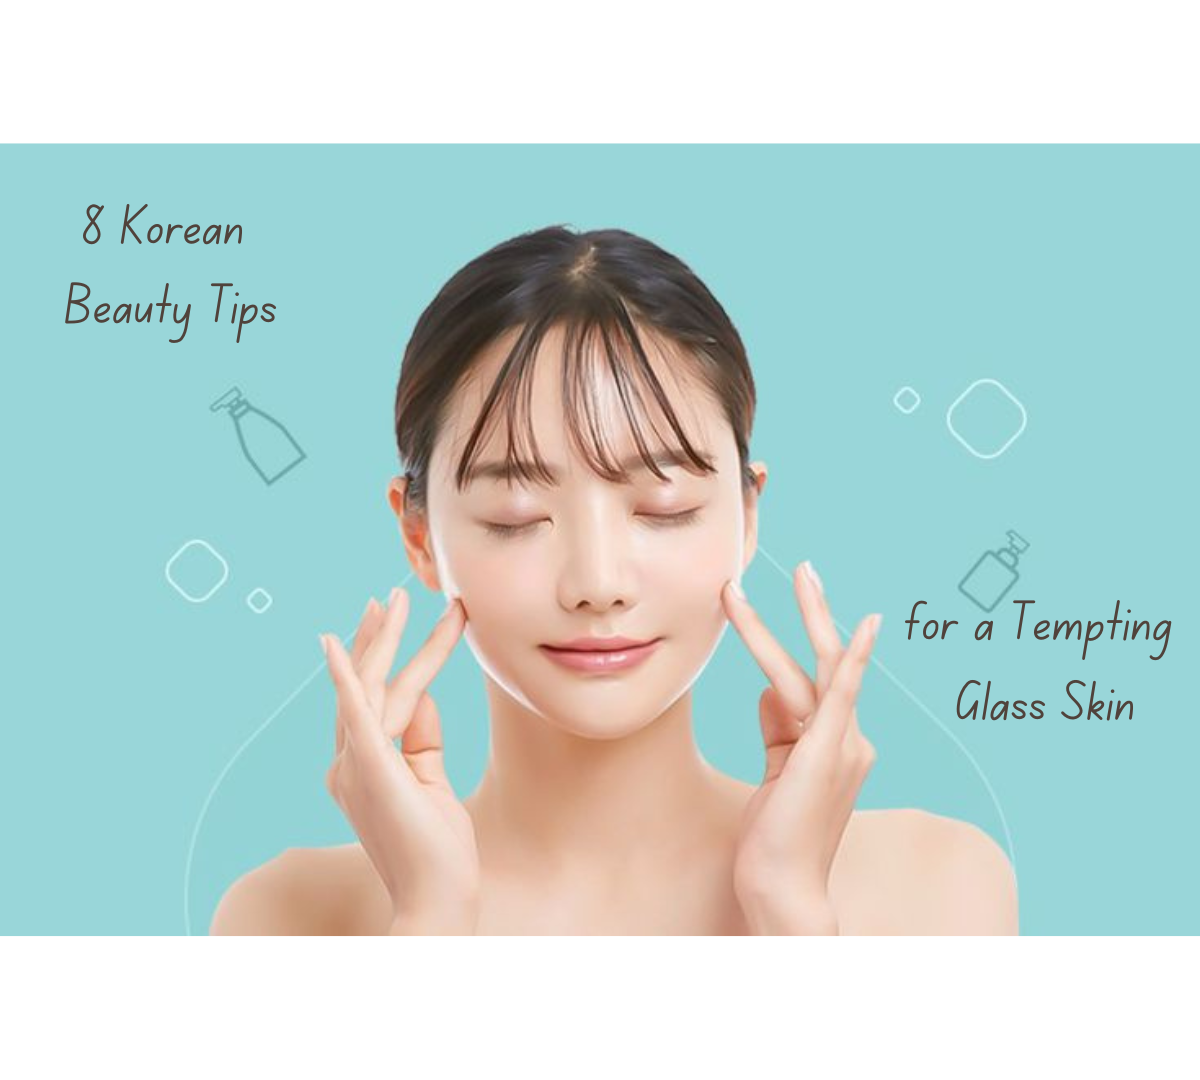 Discover the best Korean beauty tips for a tempting glass skin.